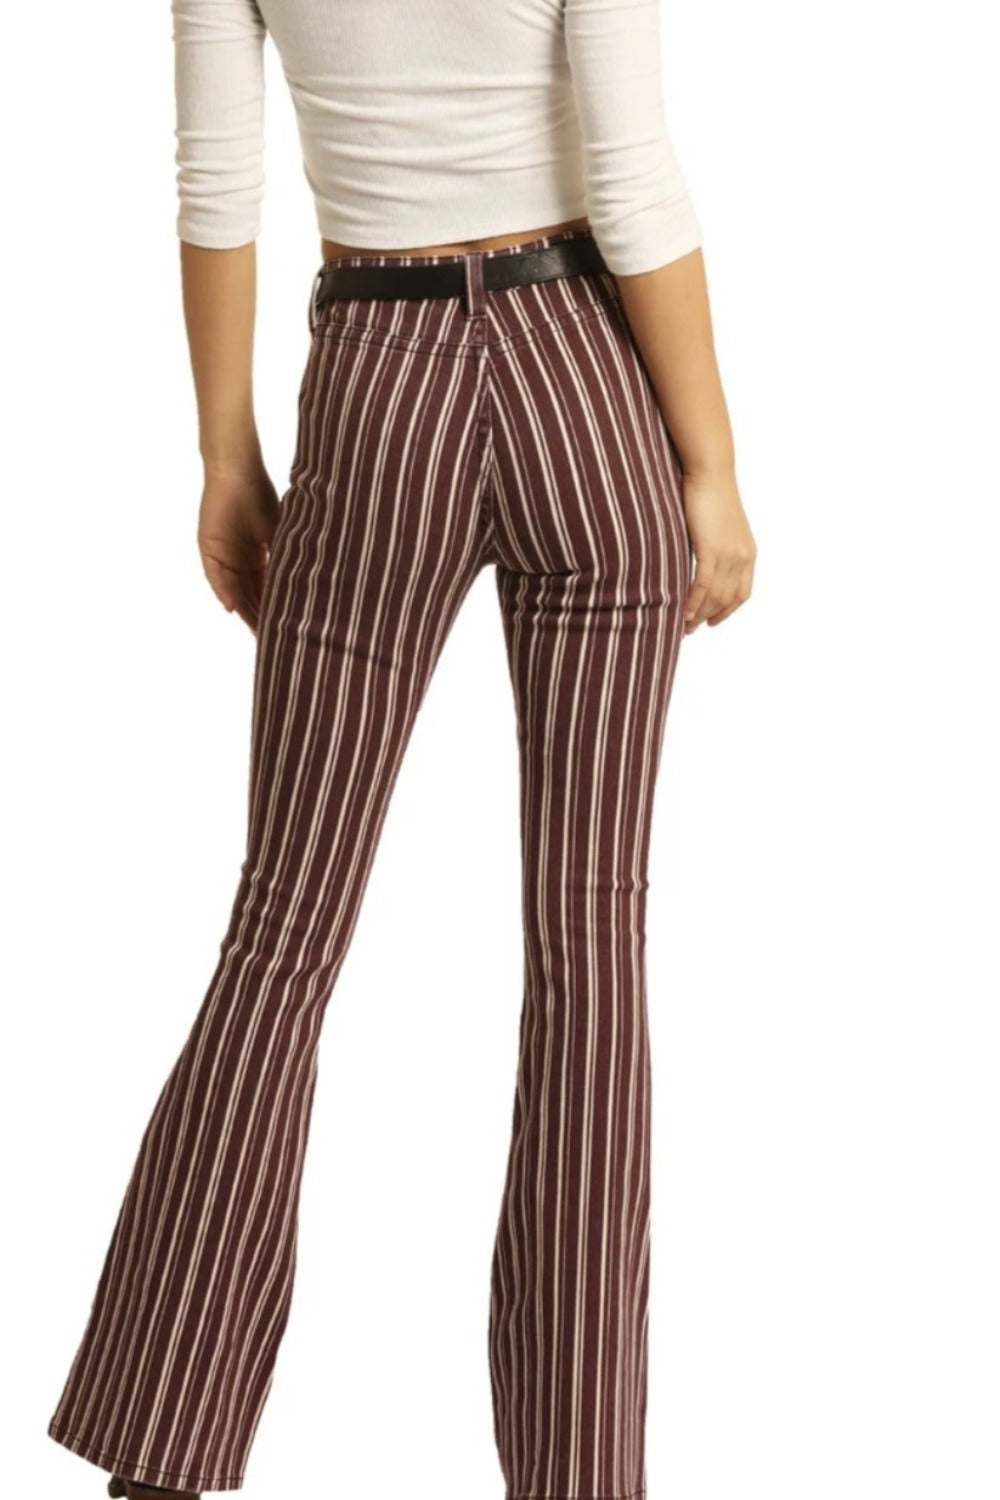 Rock&Roll Women's High Rise Extra Stretch Burgundy Striped Flare Jeans ...